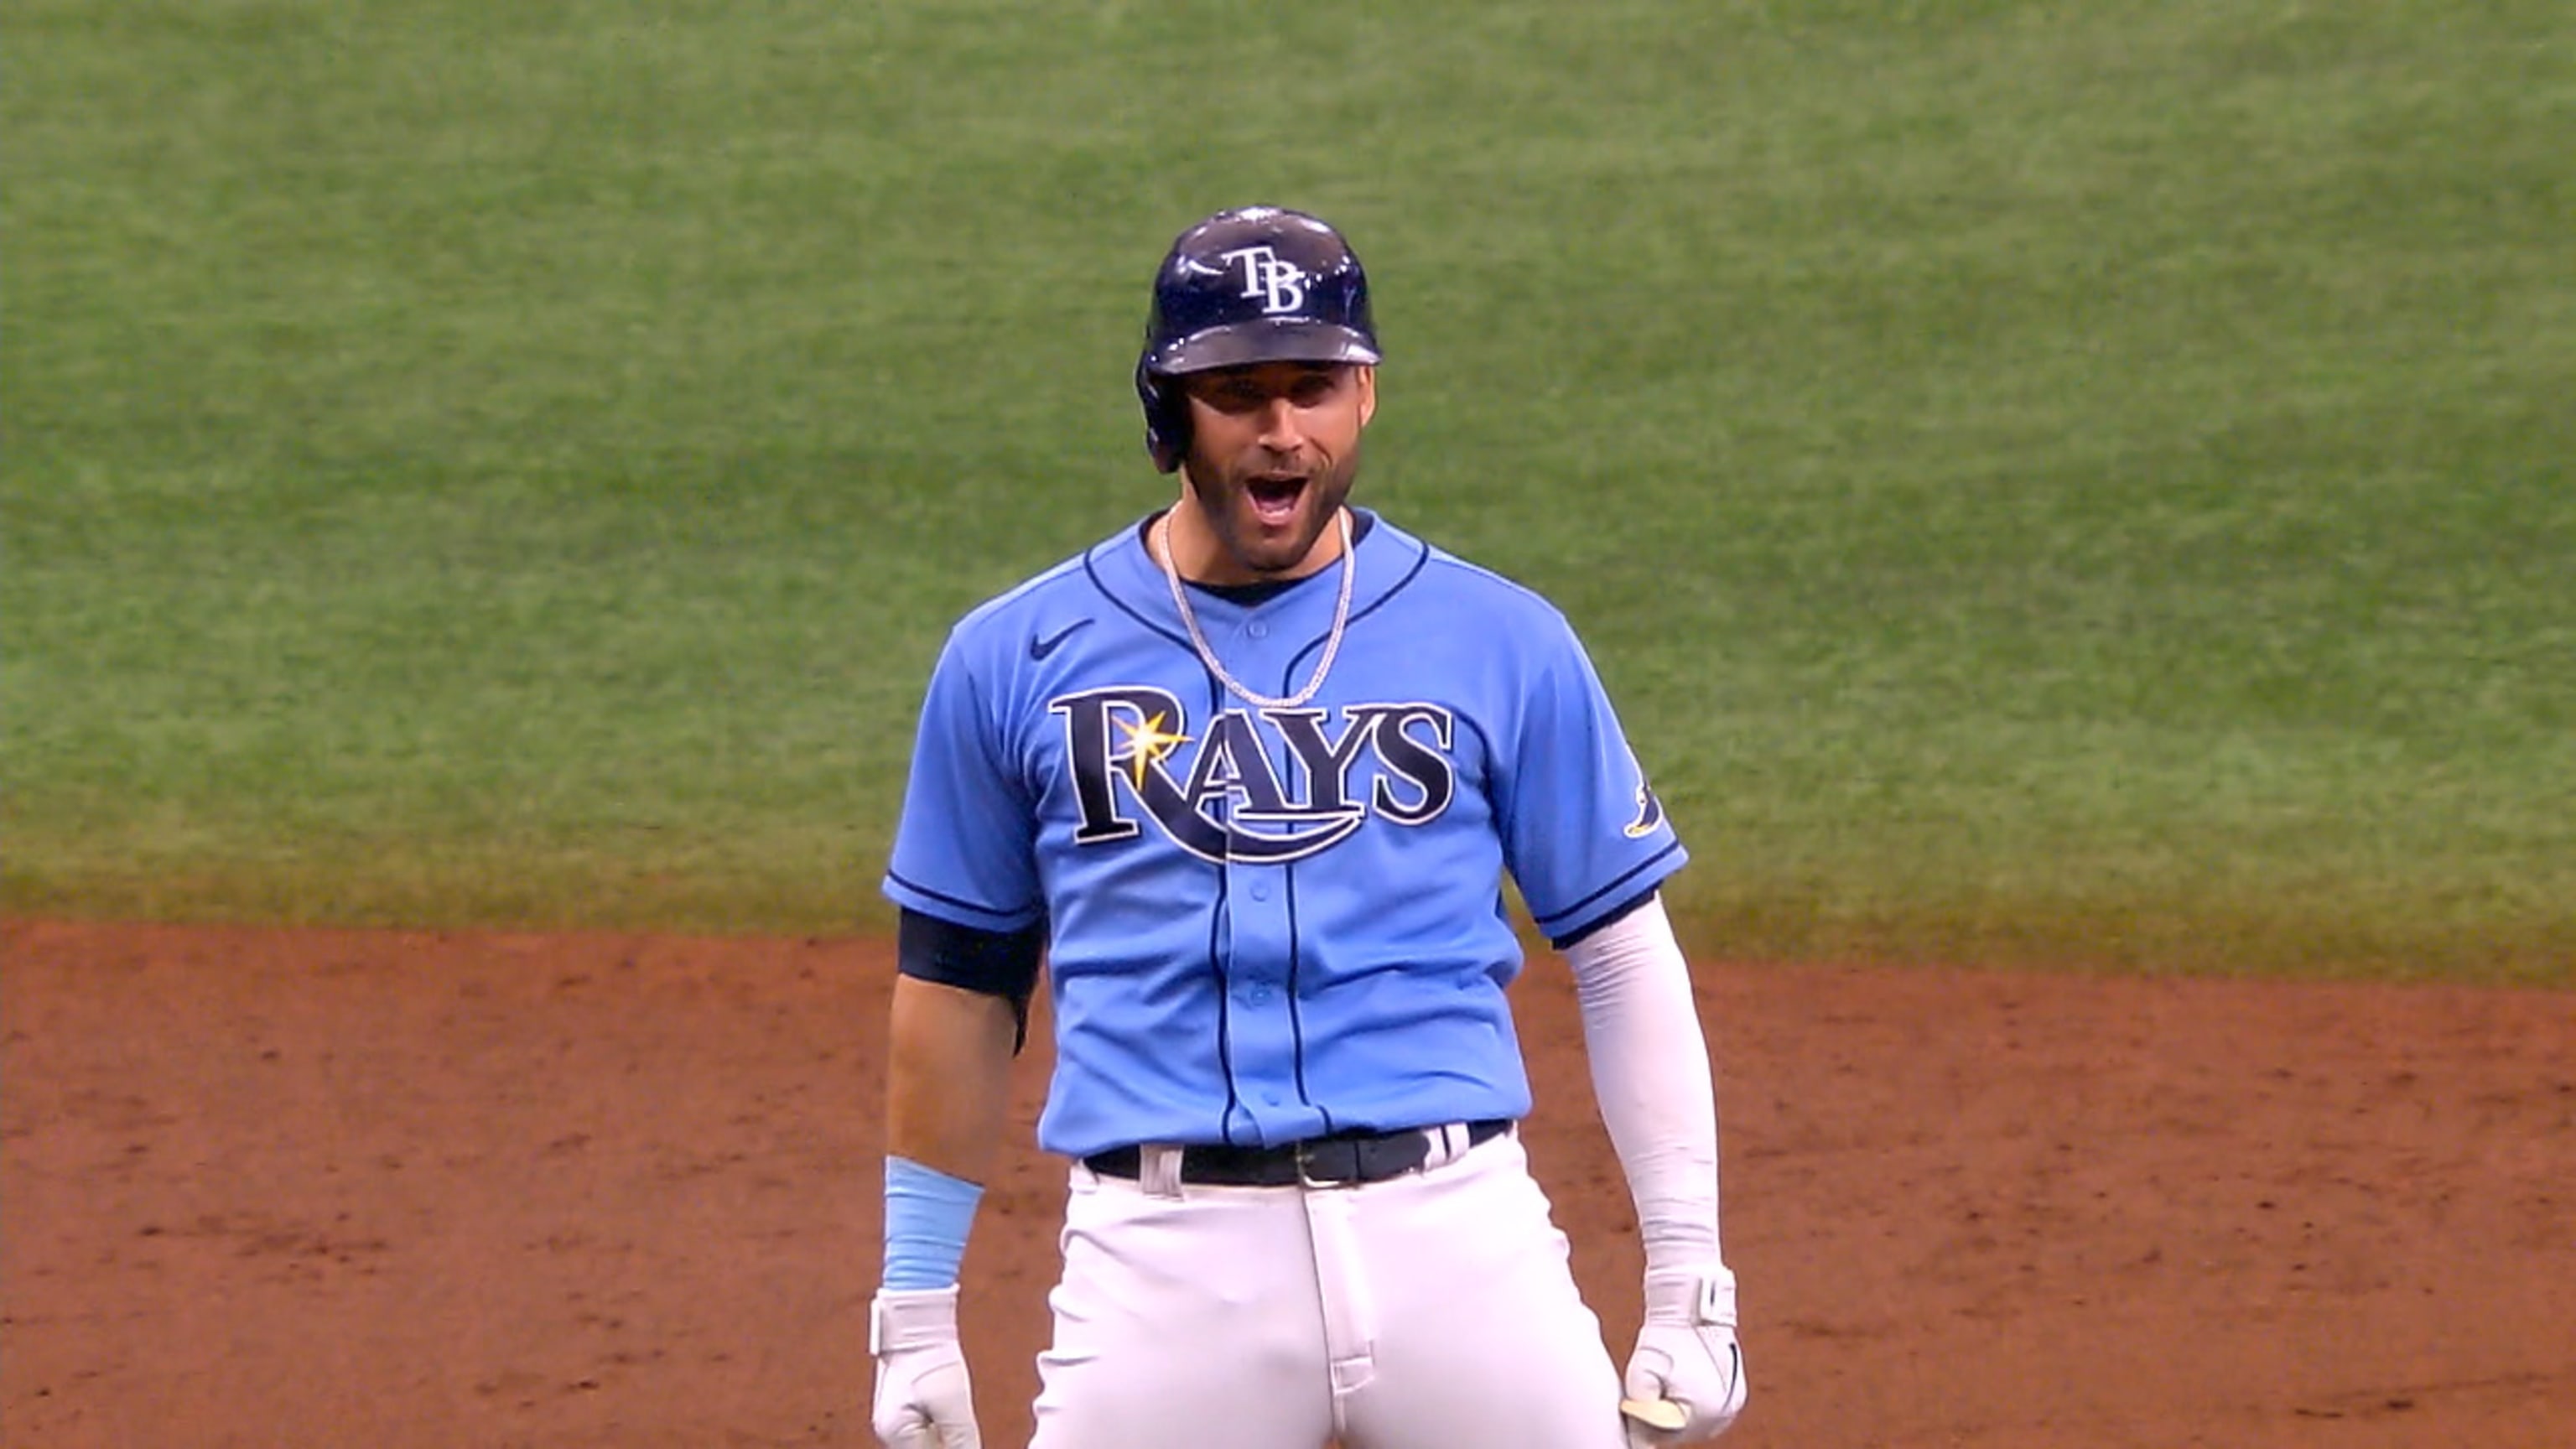 2013 MLB Prospect Review: Kevin Kiermaier, OF, Tampa Bay Rays